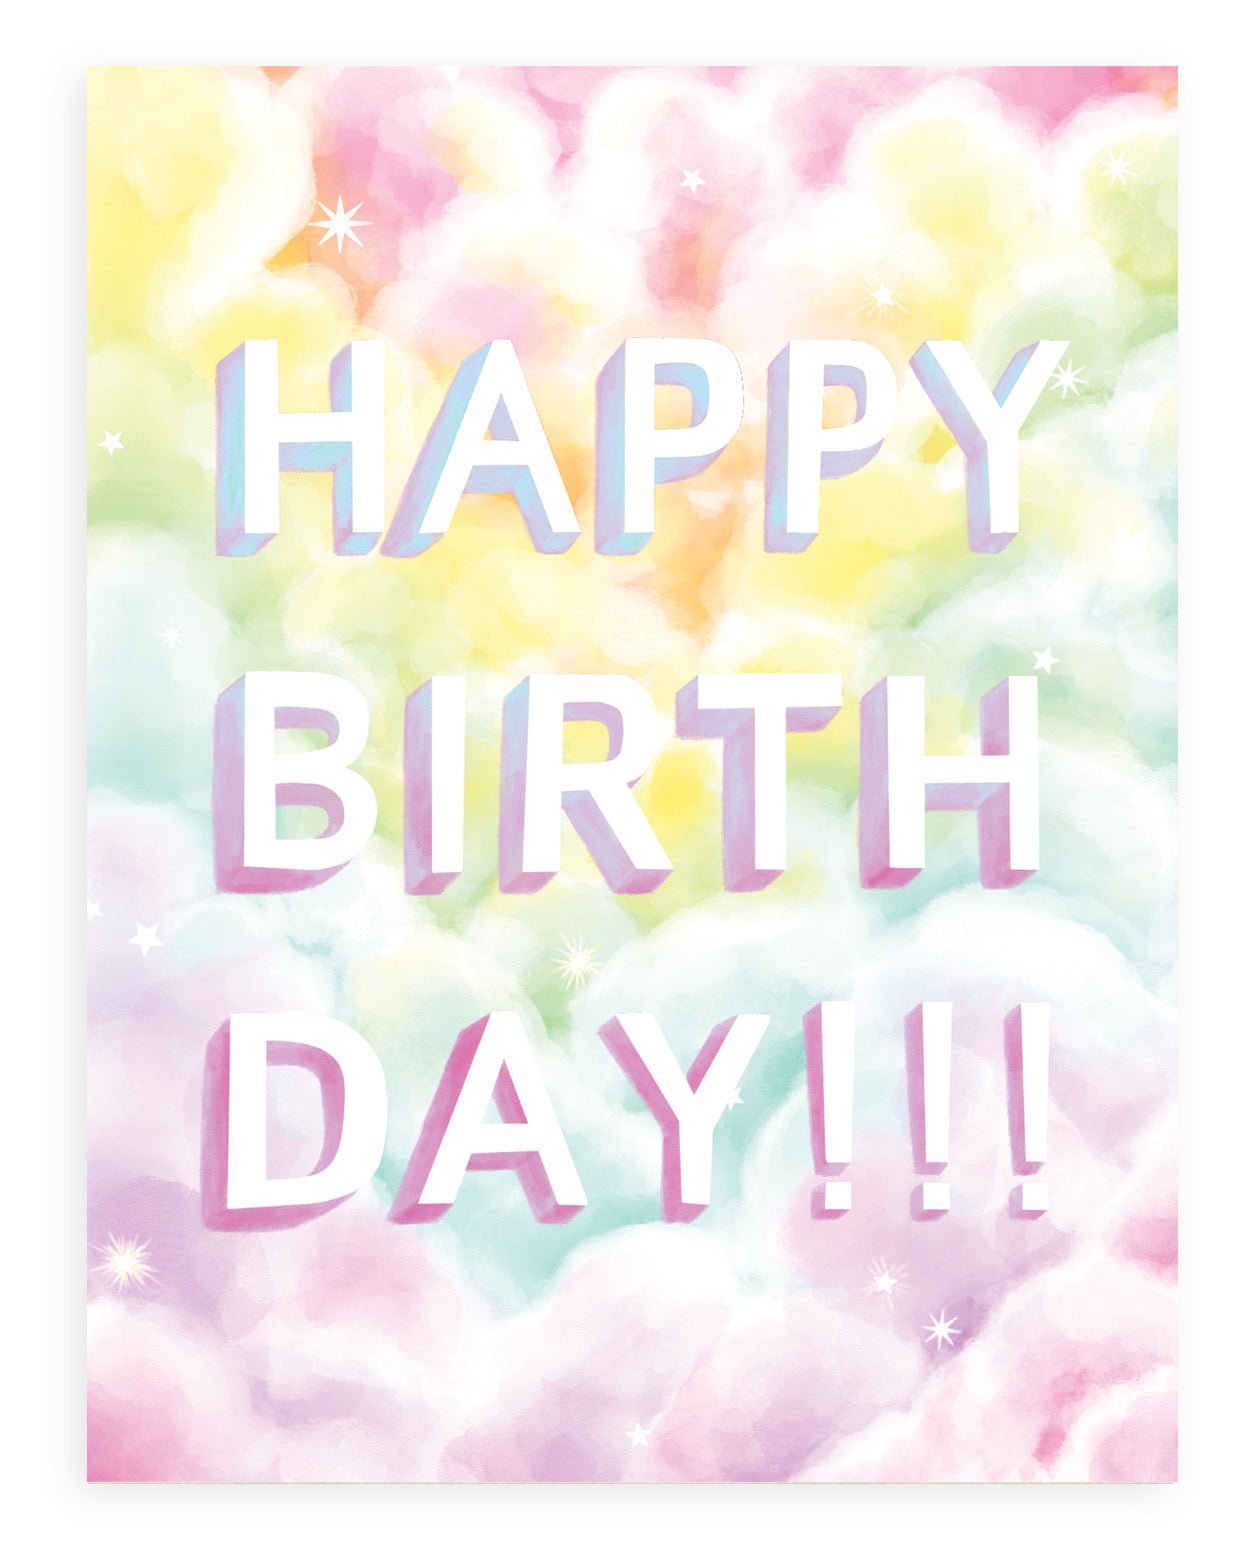 Rainbow clouds with the words "Happy Birthday" printed on cardstock. Shown with white background.